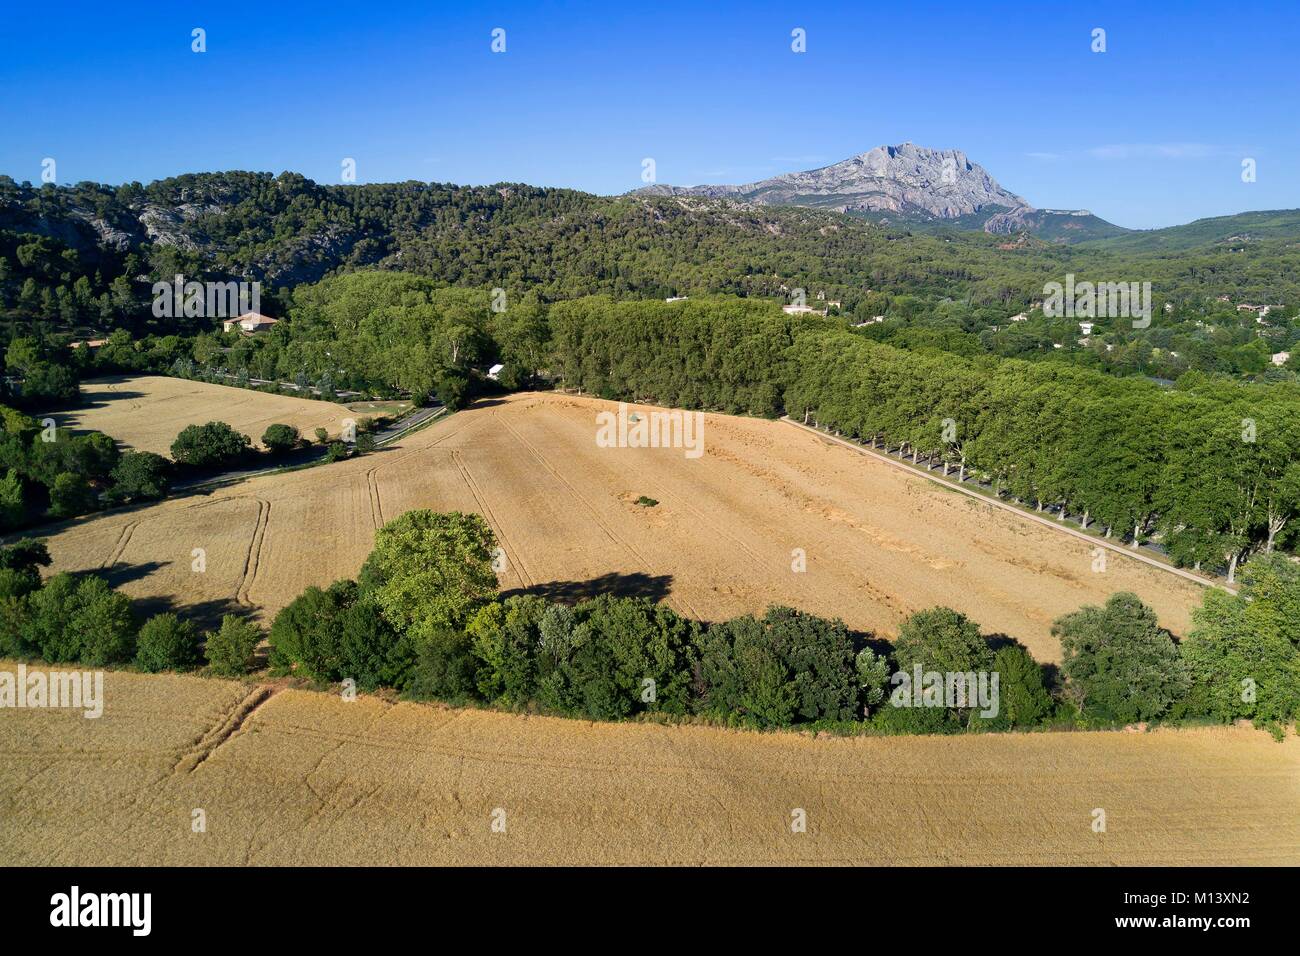 France, Bouches du Rhone, Aix en Provence region, towards the Tholonet, barley field in front of the Sainte Victoire mountain, Cezanne road (aerial view) Stock Photo